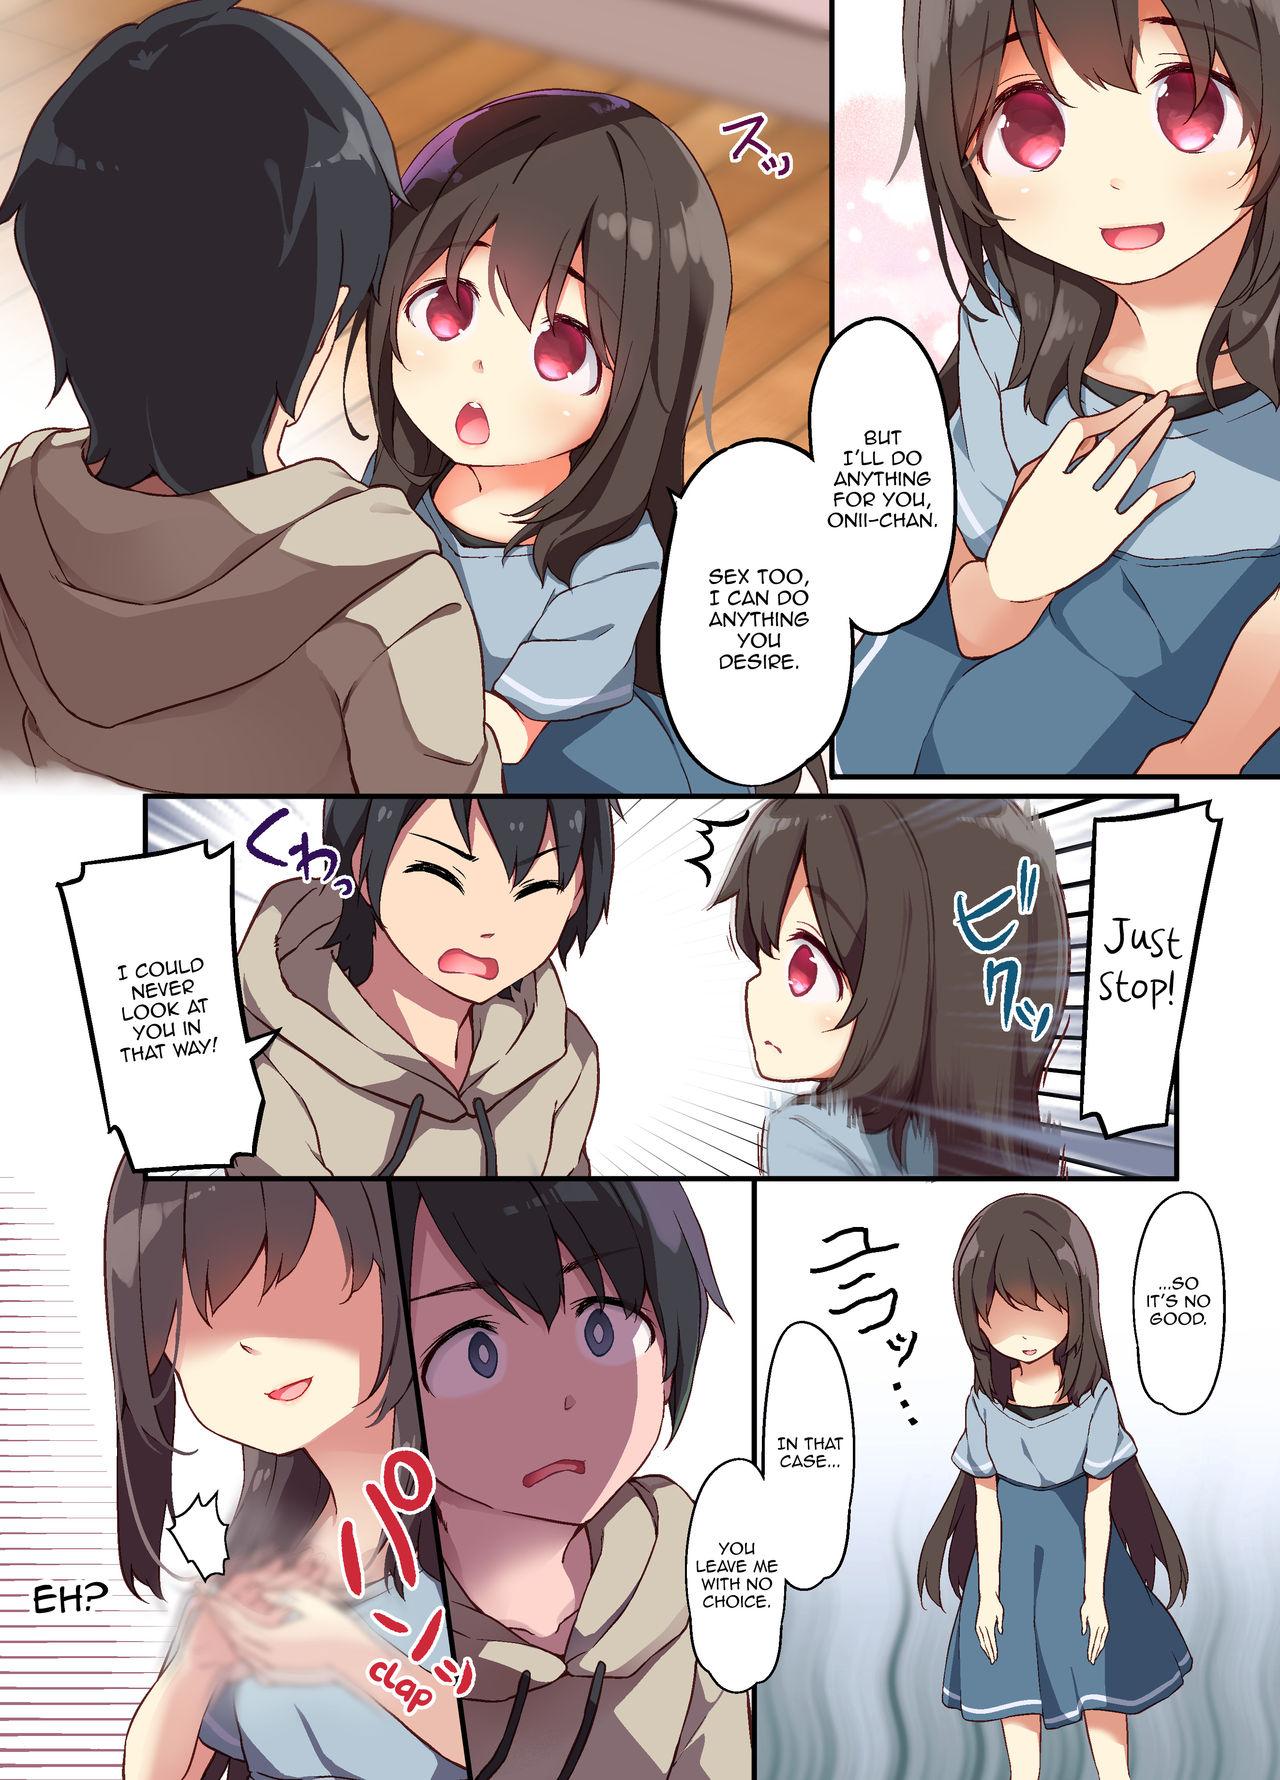 A Yandere Little Sister Wants to Be Impregnated by Her Big Brother, So She Switches Bodies With Him and They Have Baby-Making Sex 6